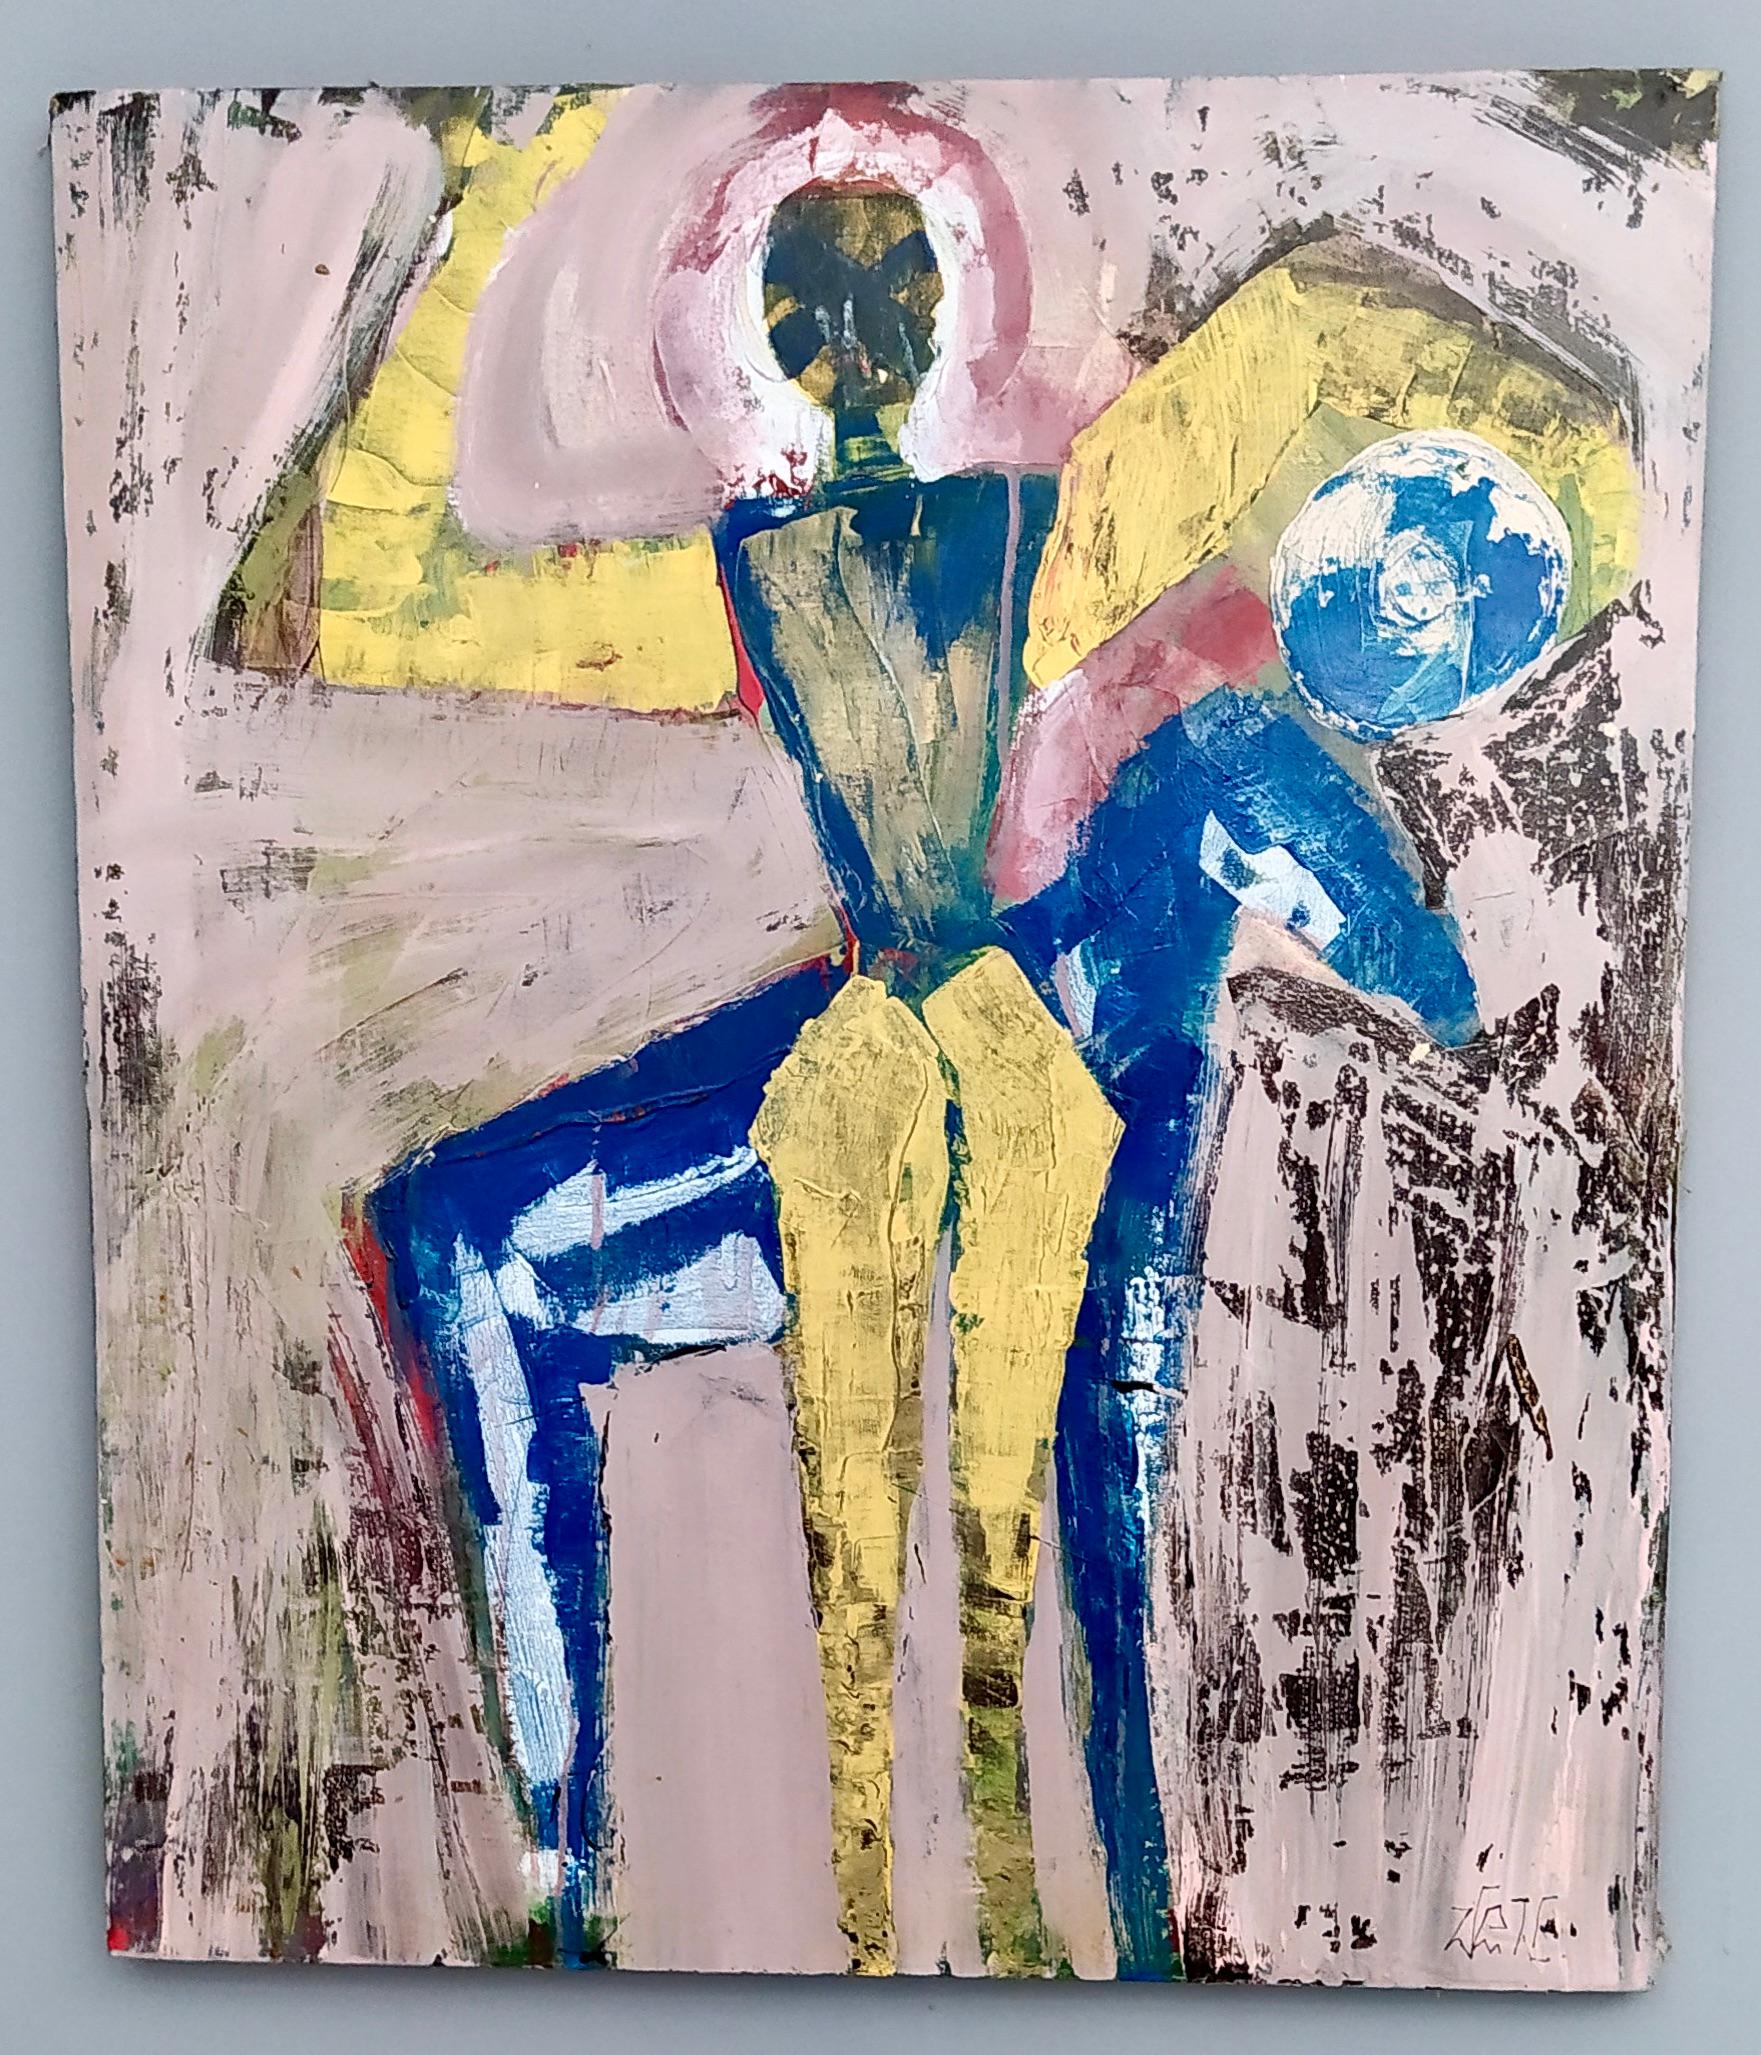 "Giocoliere" by Enzio Wenk, 2020 - Mixed Media on Canvas, Neo-Expressionism